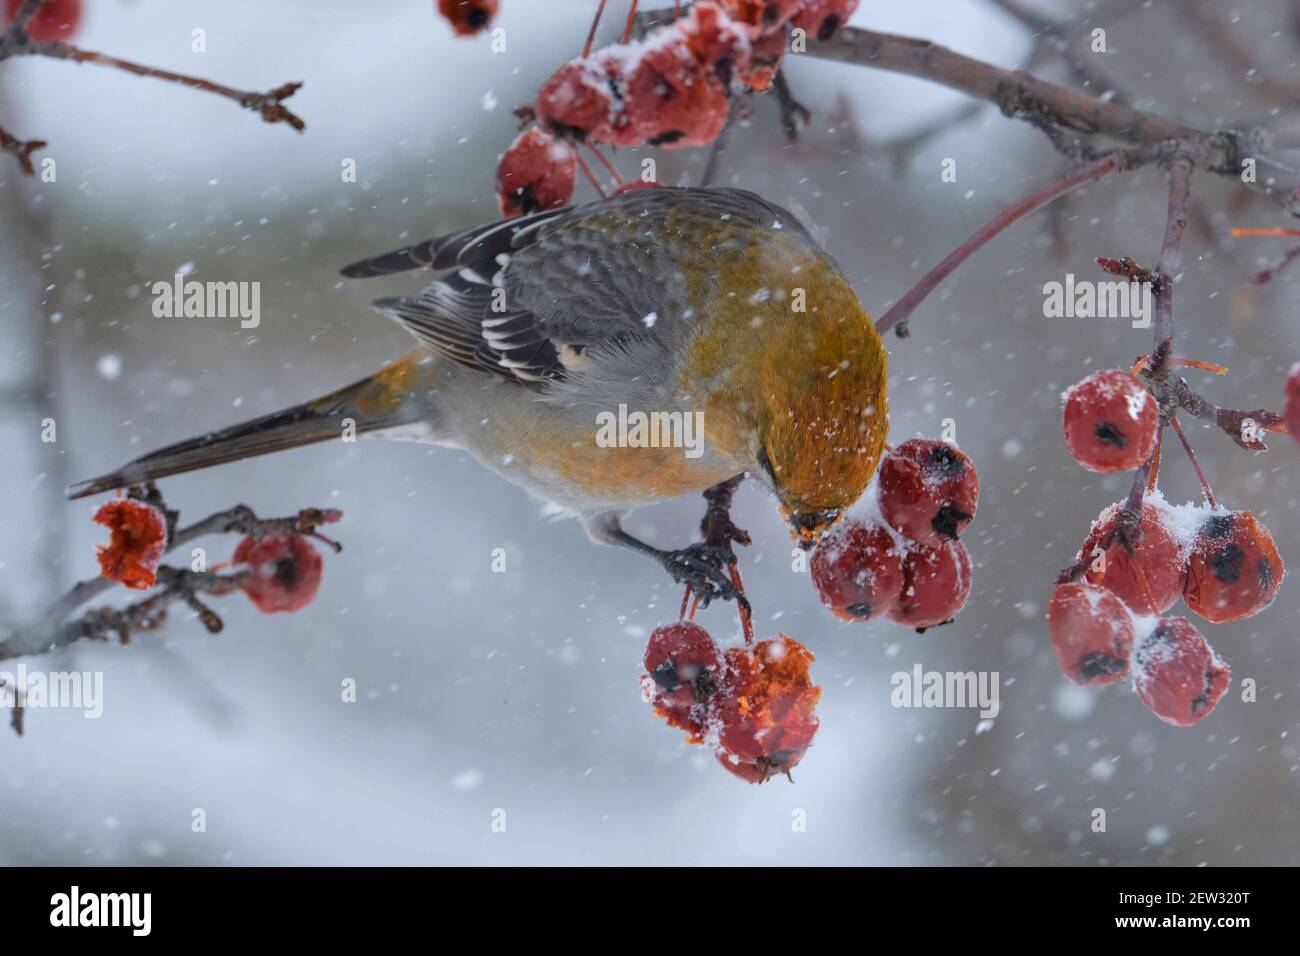 Pine Grosbeak,  Pinicola enucleator, eating berries during a snow storm on winter's day Stock Photo